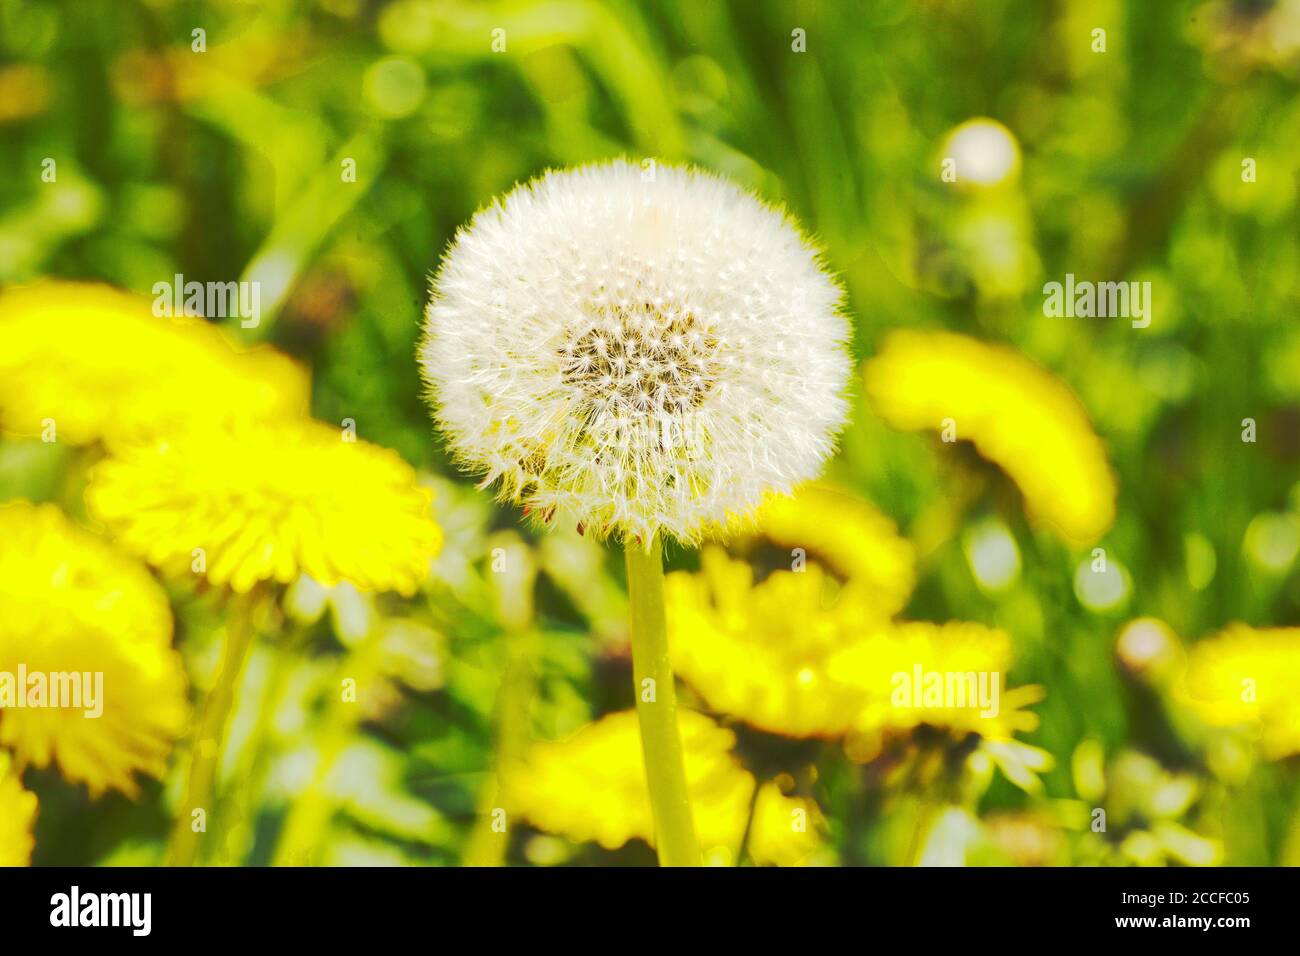 Dandelion meadow with flowers and infructescence Stock Photo